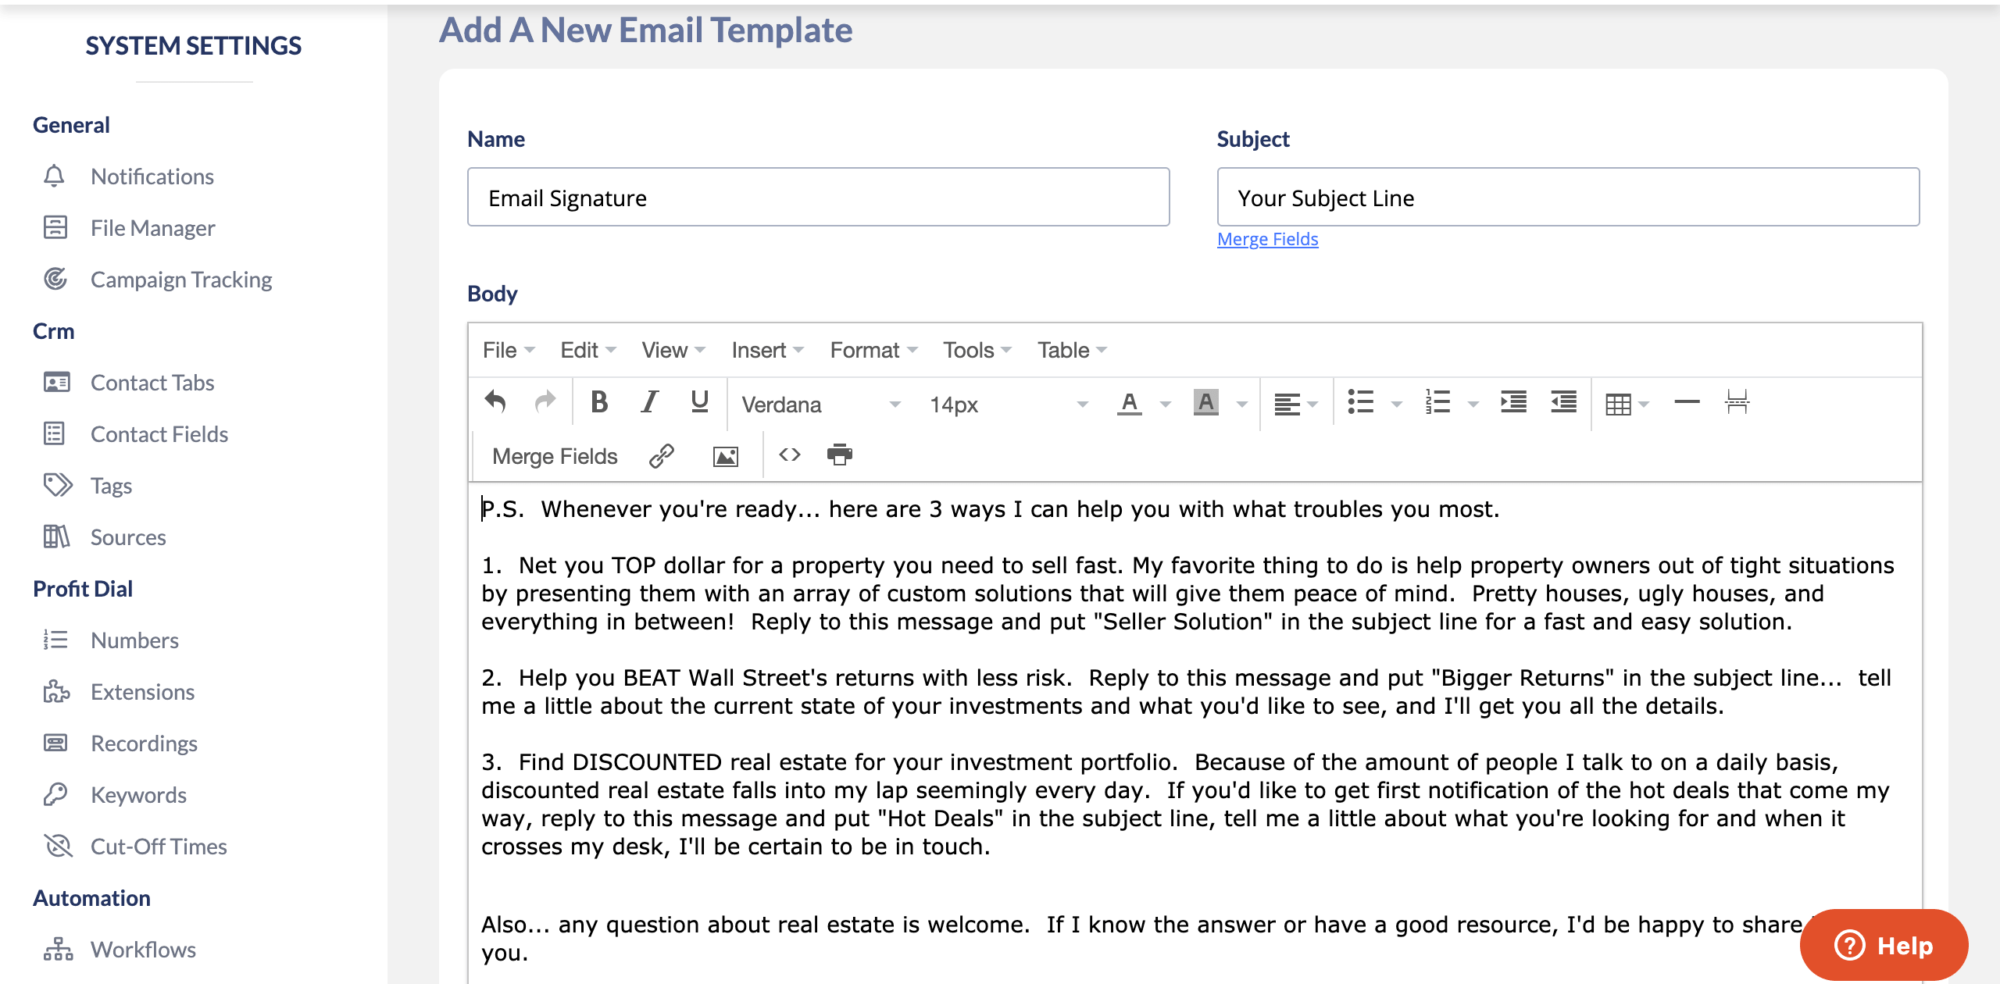 Tailor your real estate marketing with REI Blackbook's custom email templates.